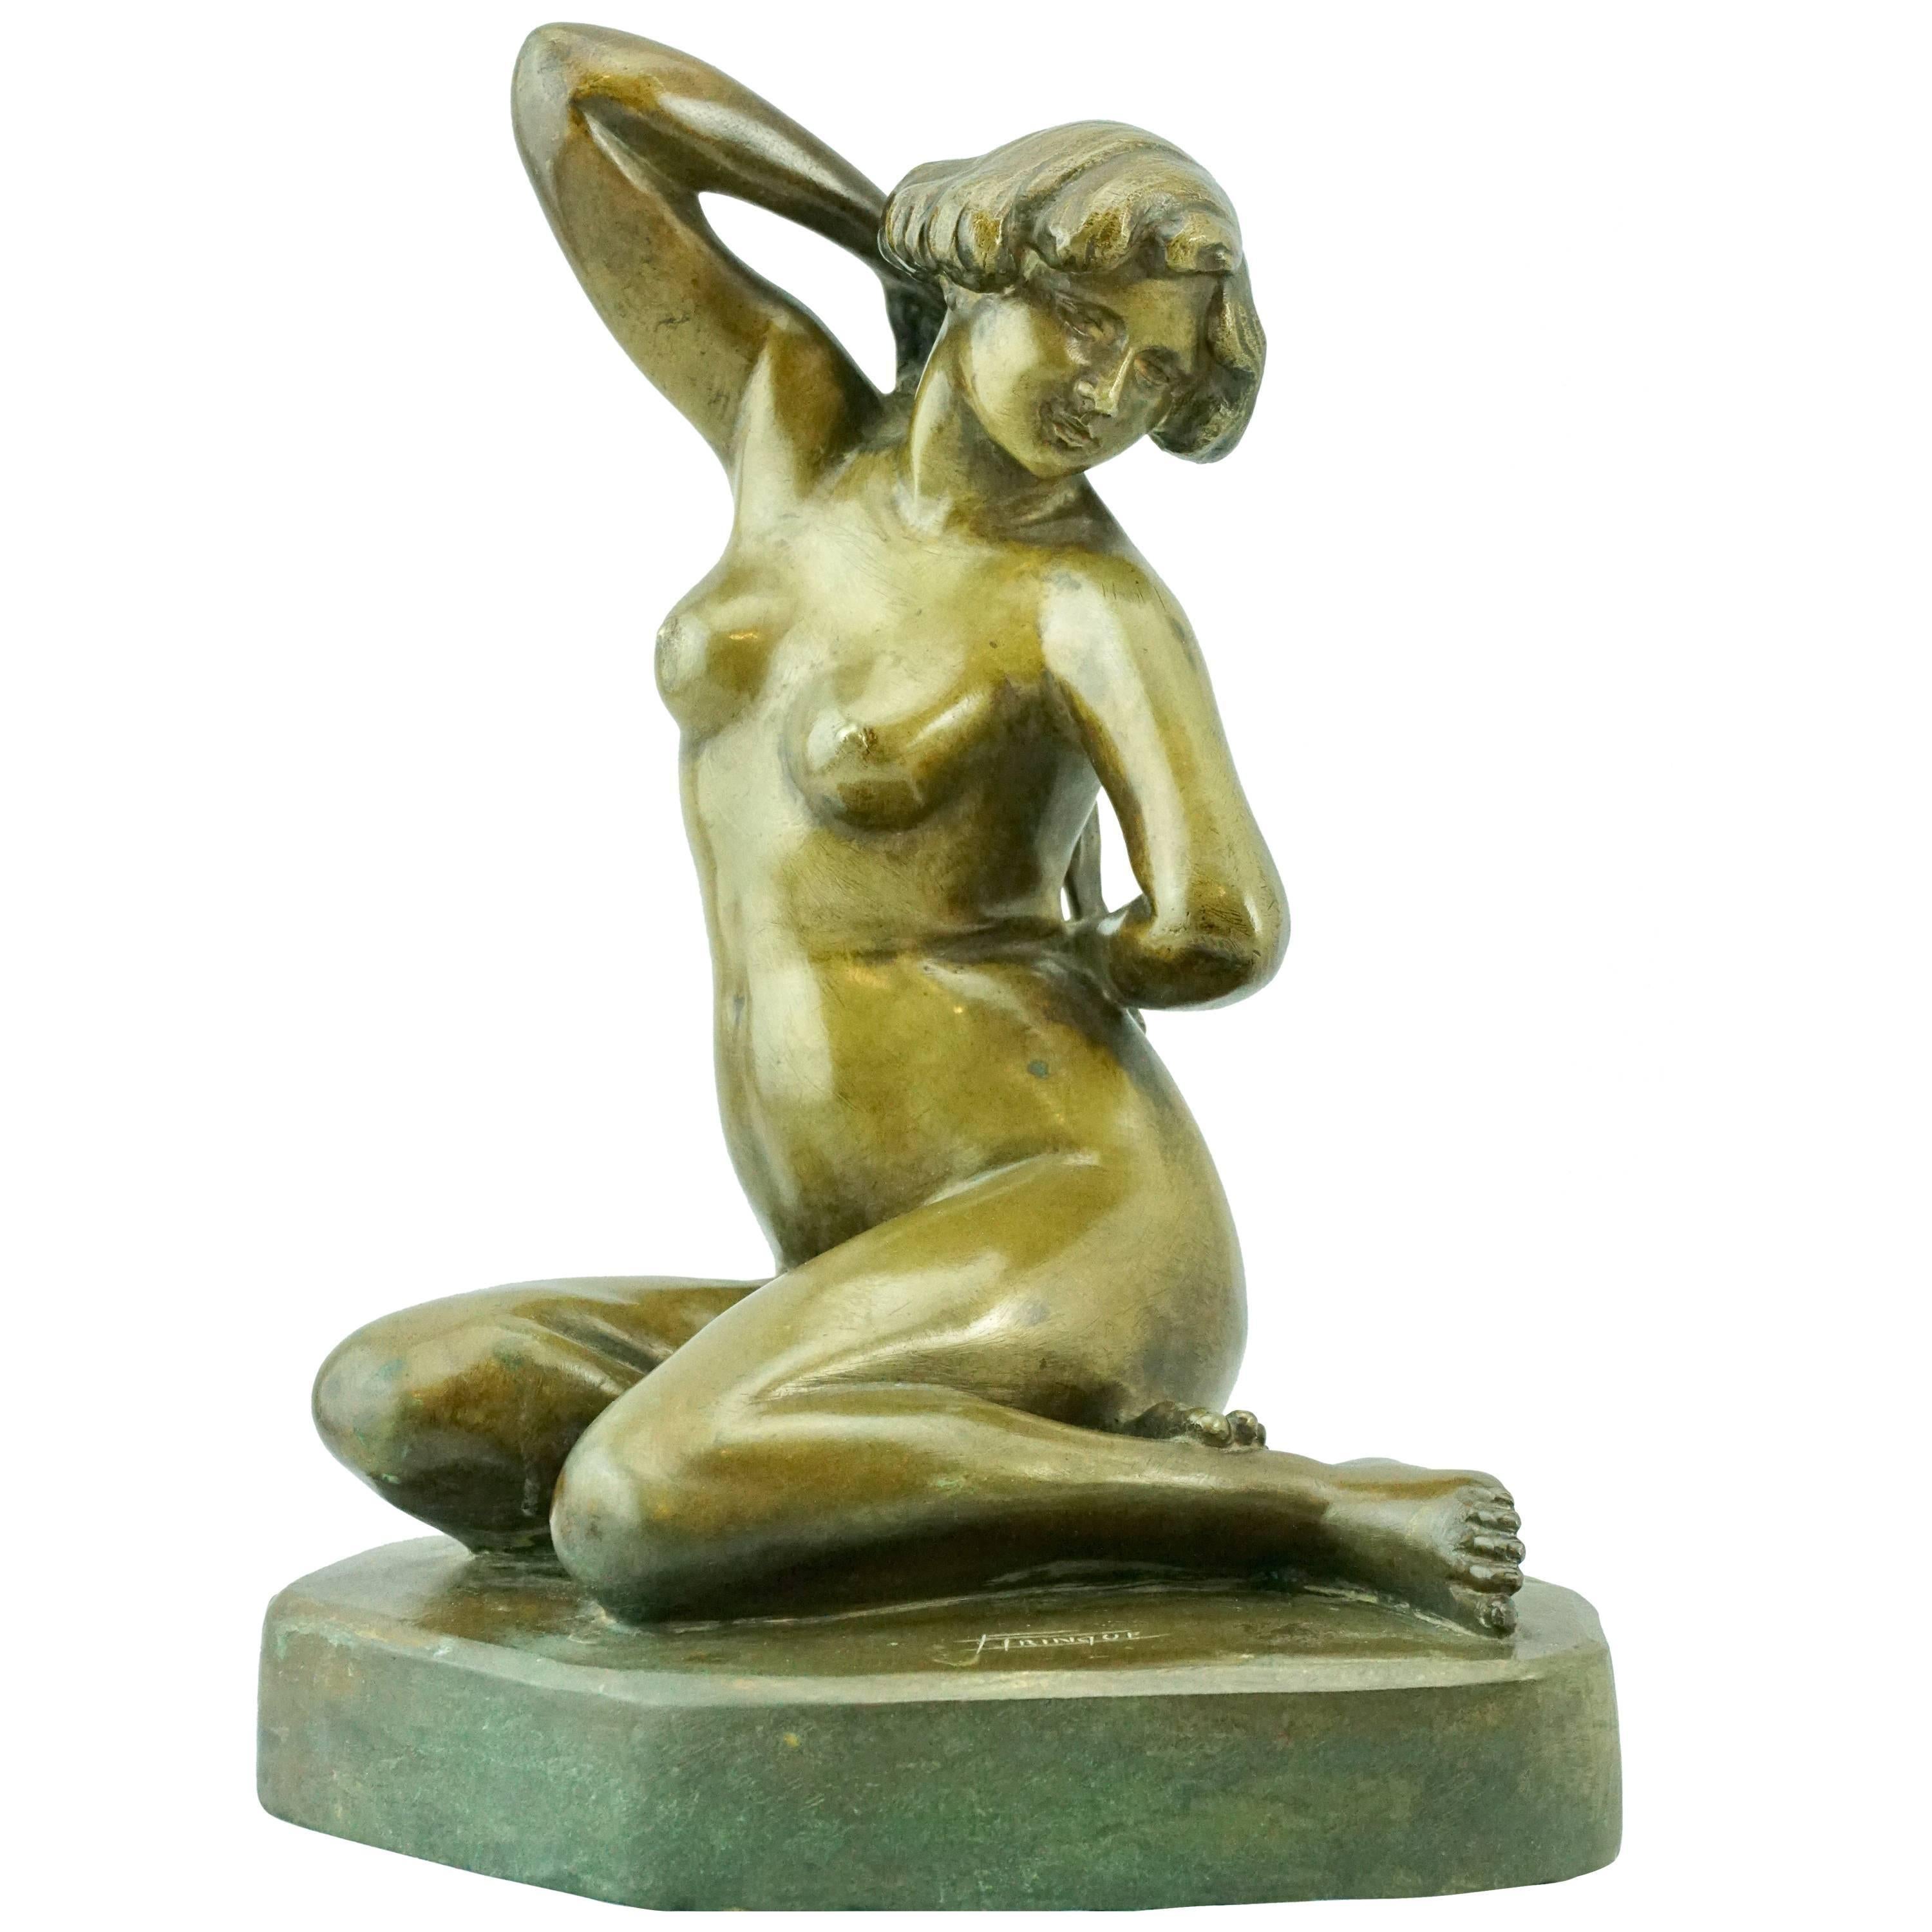 Unknown Figurative Sculpture - Charming French Art Deco Bronze Nude by F. Trinque, 1930